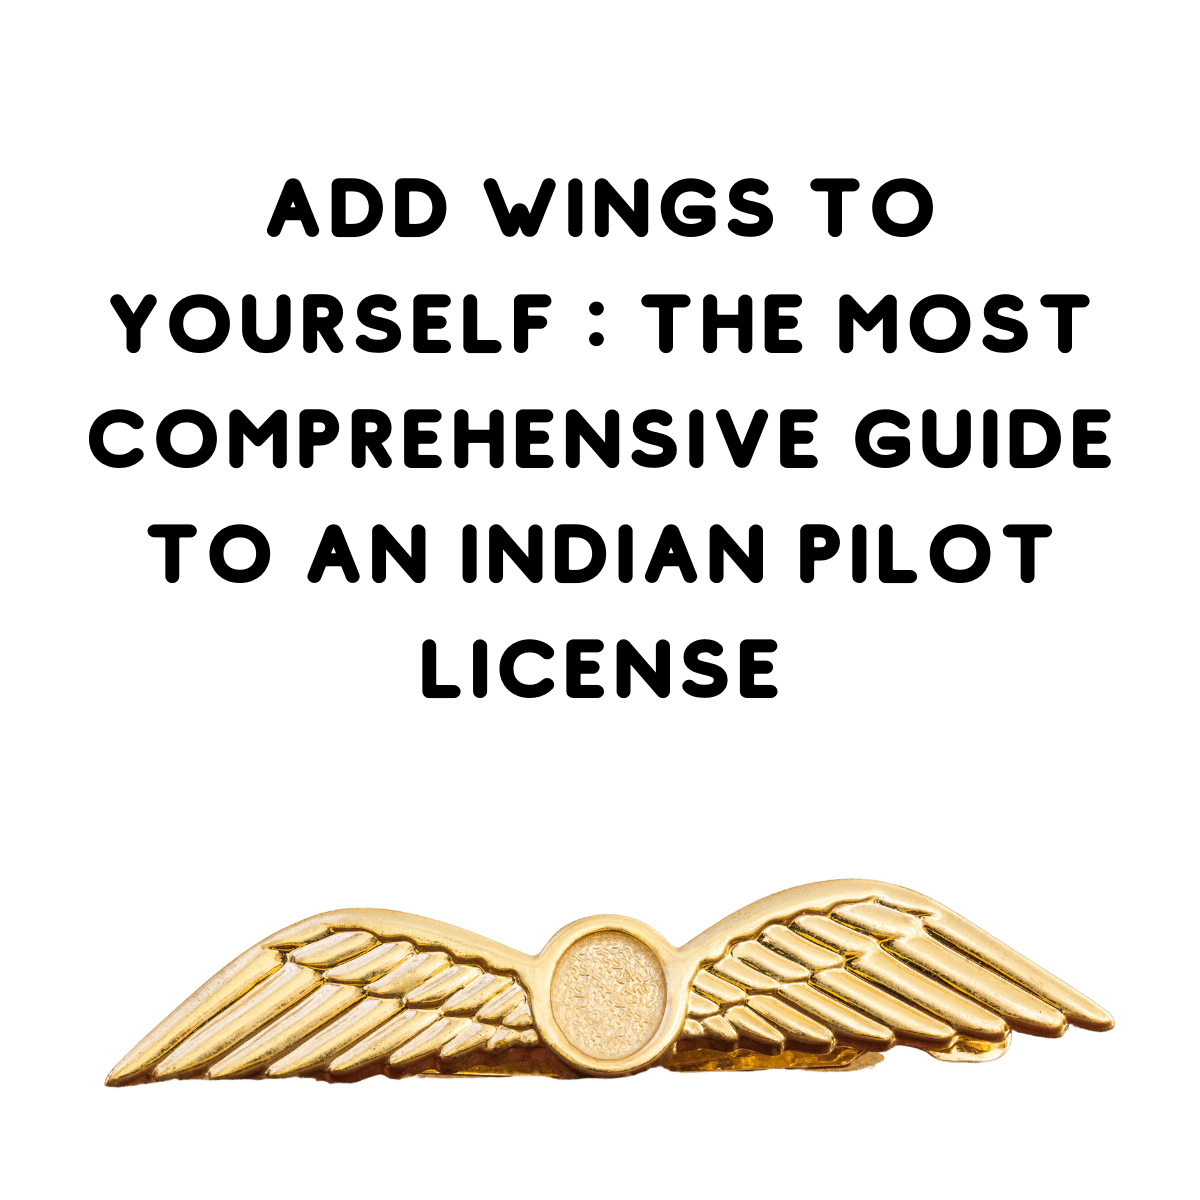 Add Wings to yourself : Becoming a Pilot